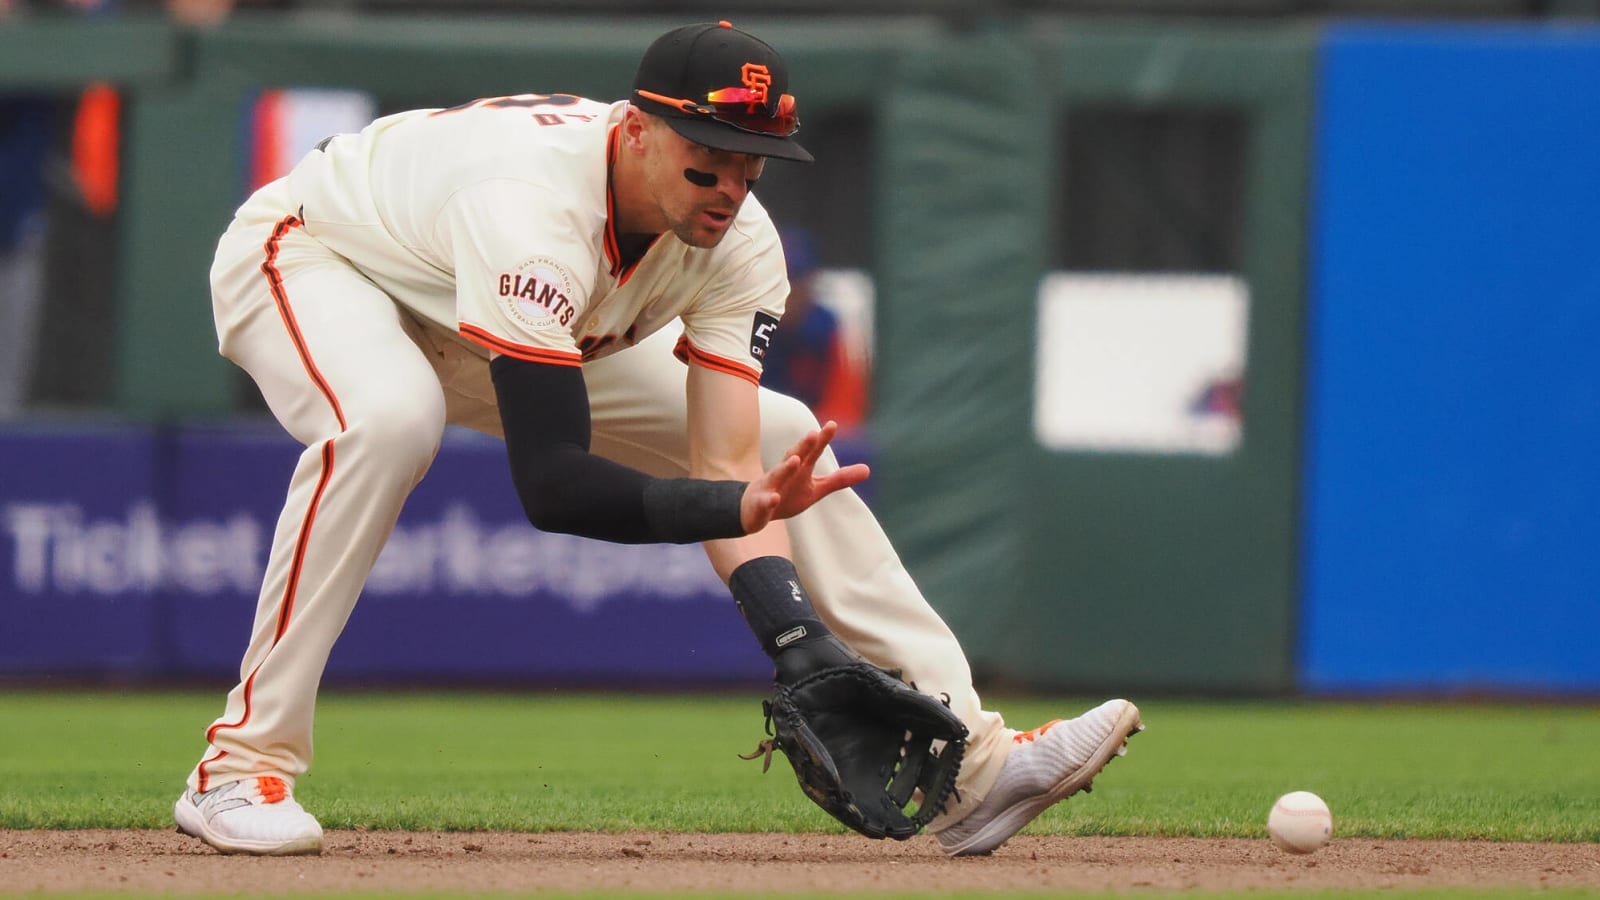 Watch: Giants shortstop airmails throw on routine grounder